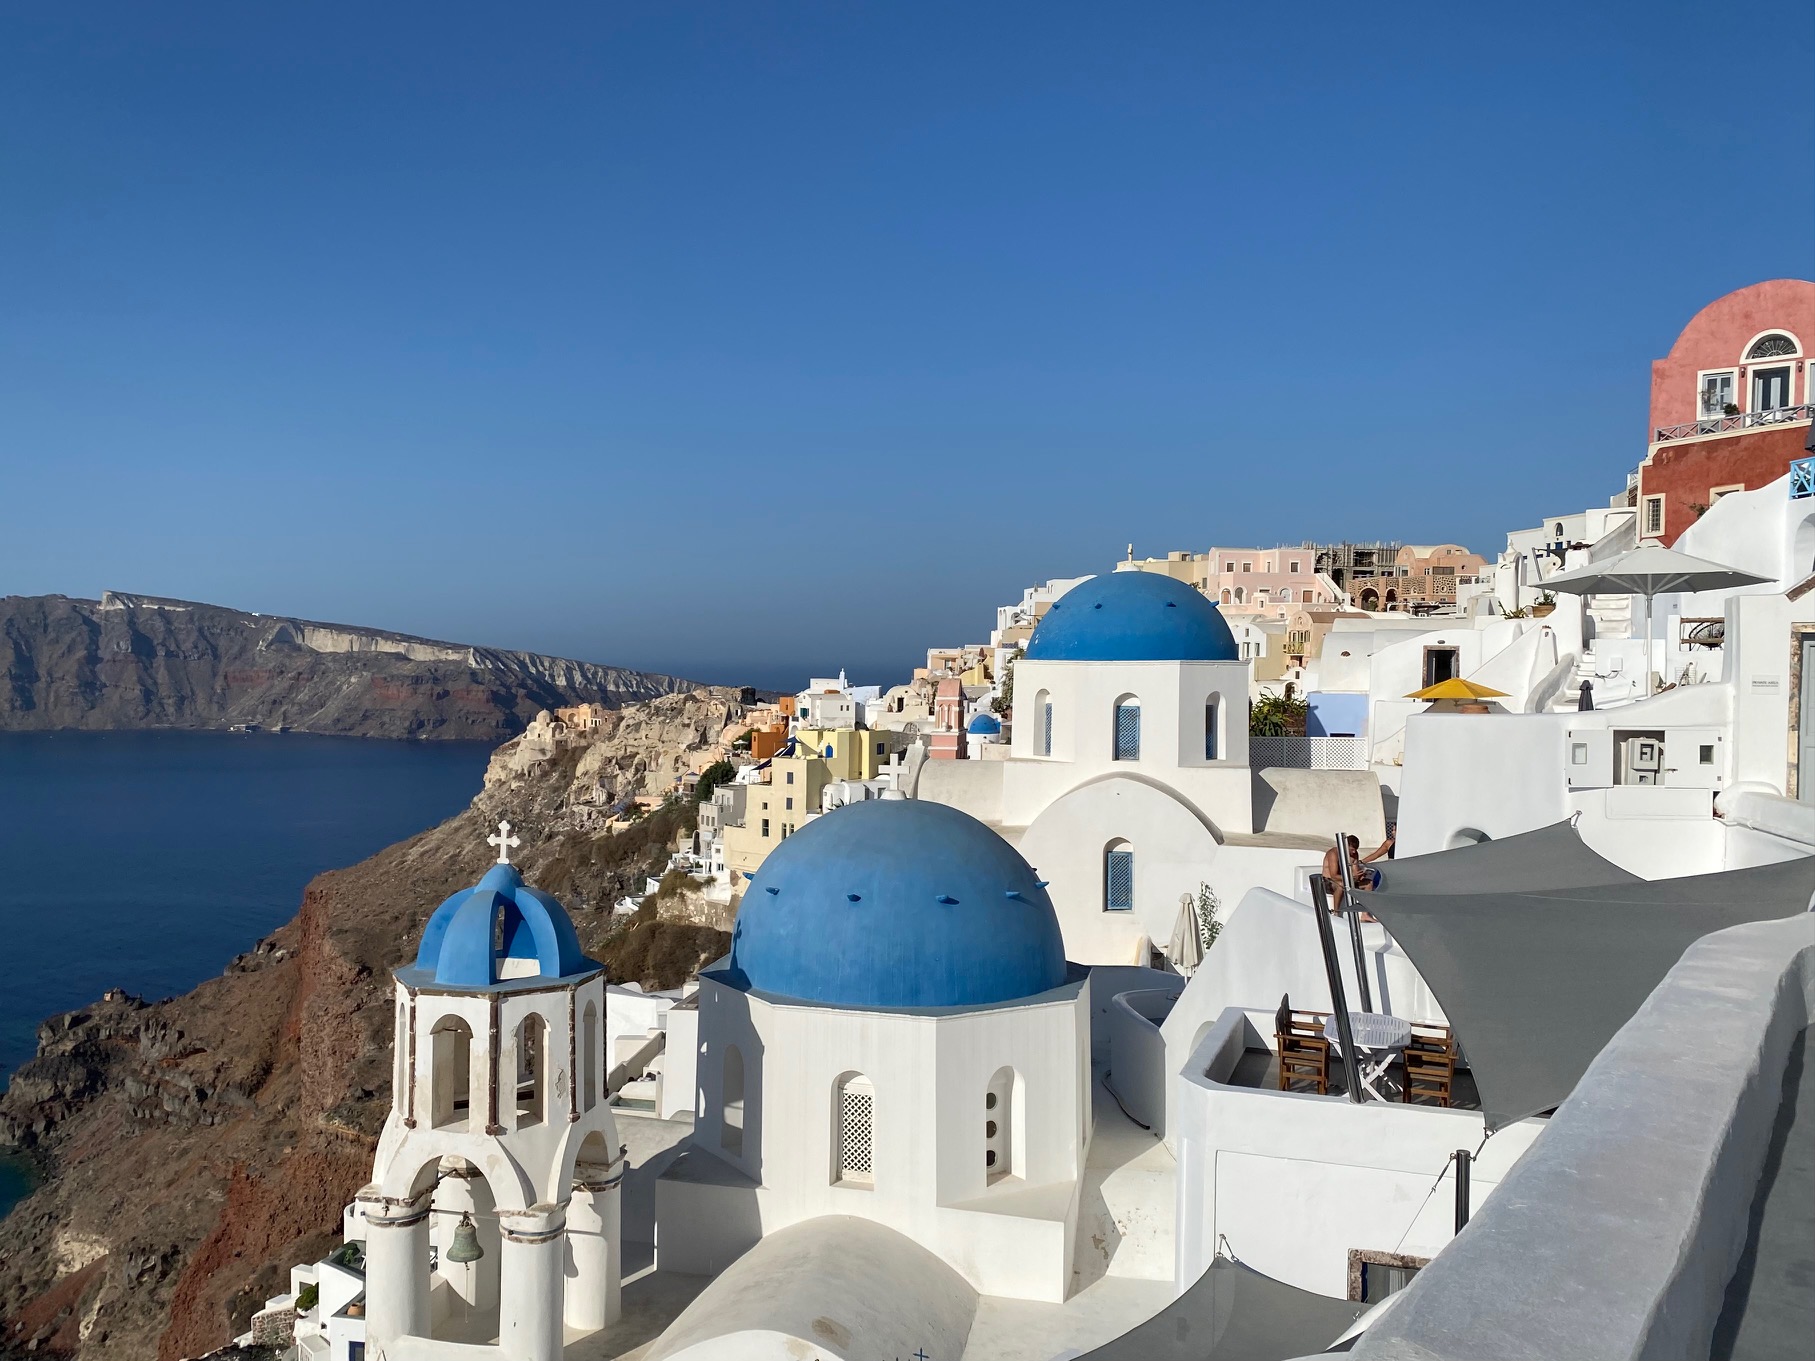 View of the Santorini caldera with the three blue domes of the churches | Best Things to Do in Santorini 2022 | greekislandbucketlist.com